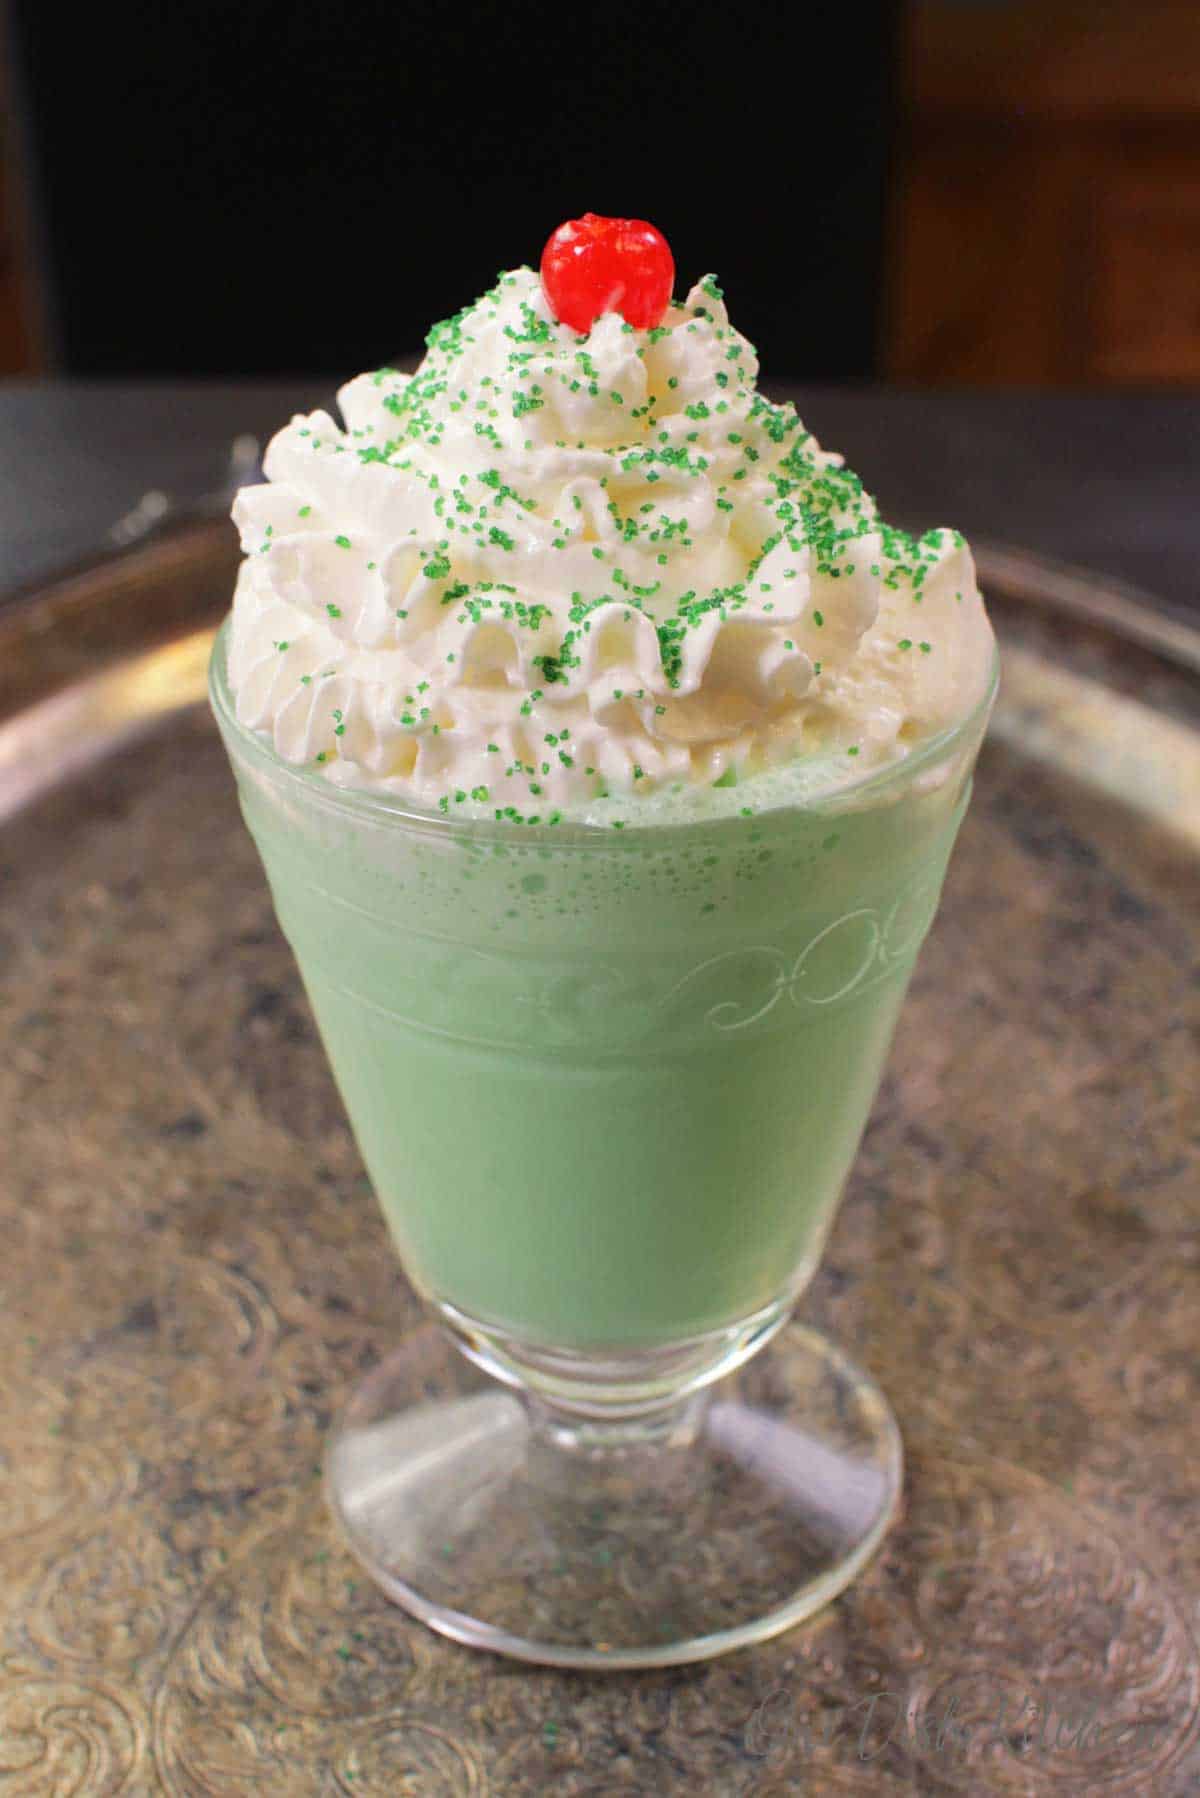 A shamrock shake in a tall dessert glass topped with whipped cream, green sprinkles, and a maraschino cherry.